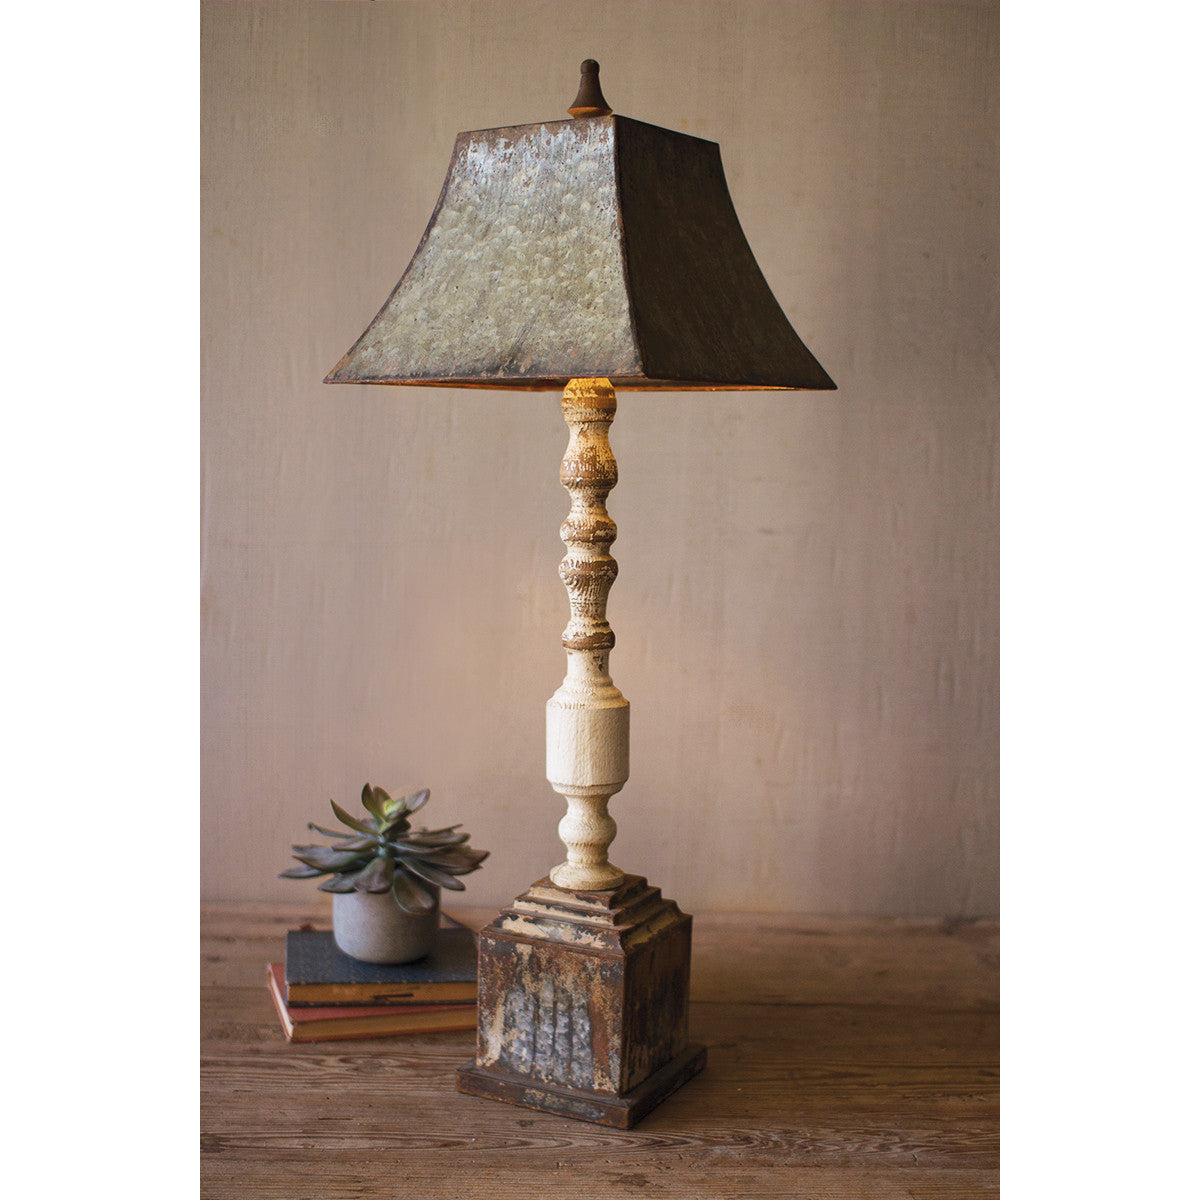 The Banister Table Lamp